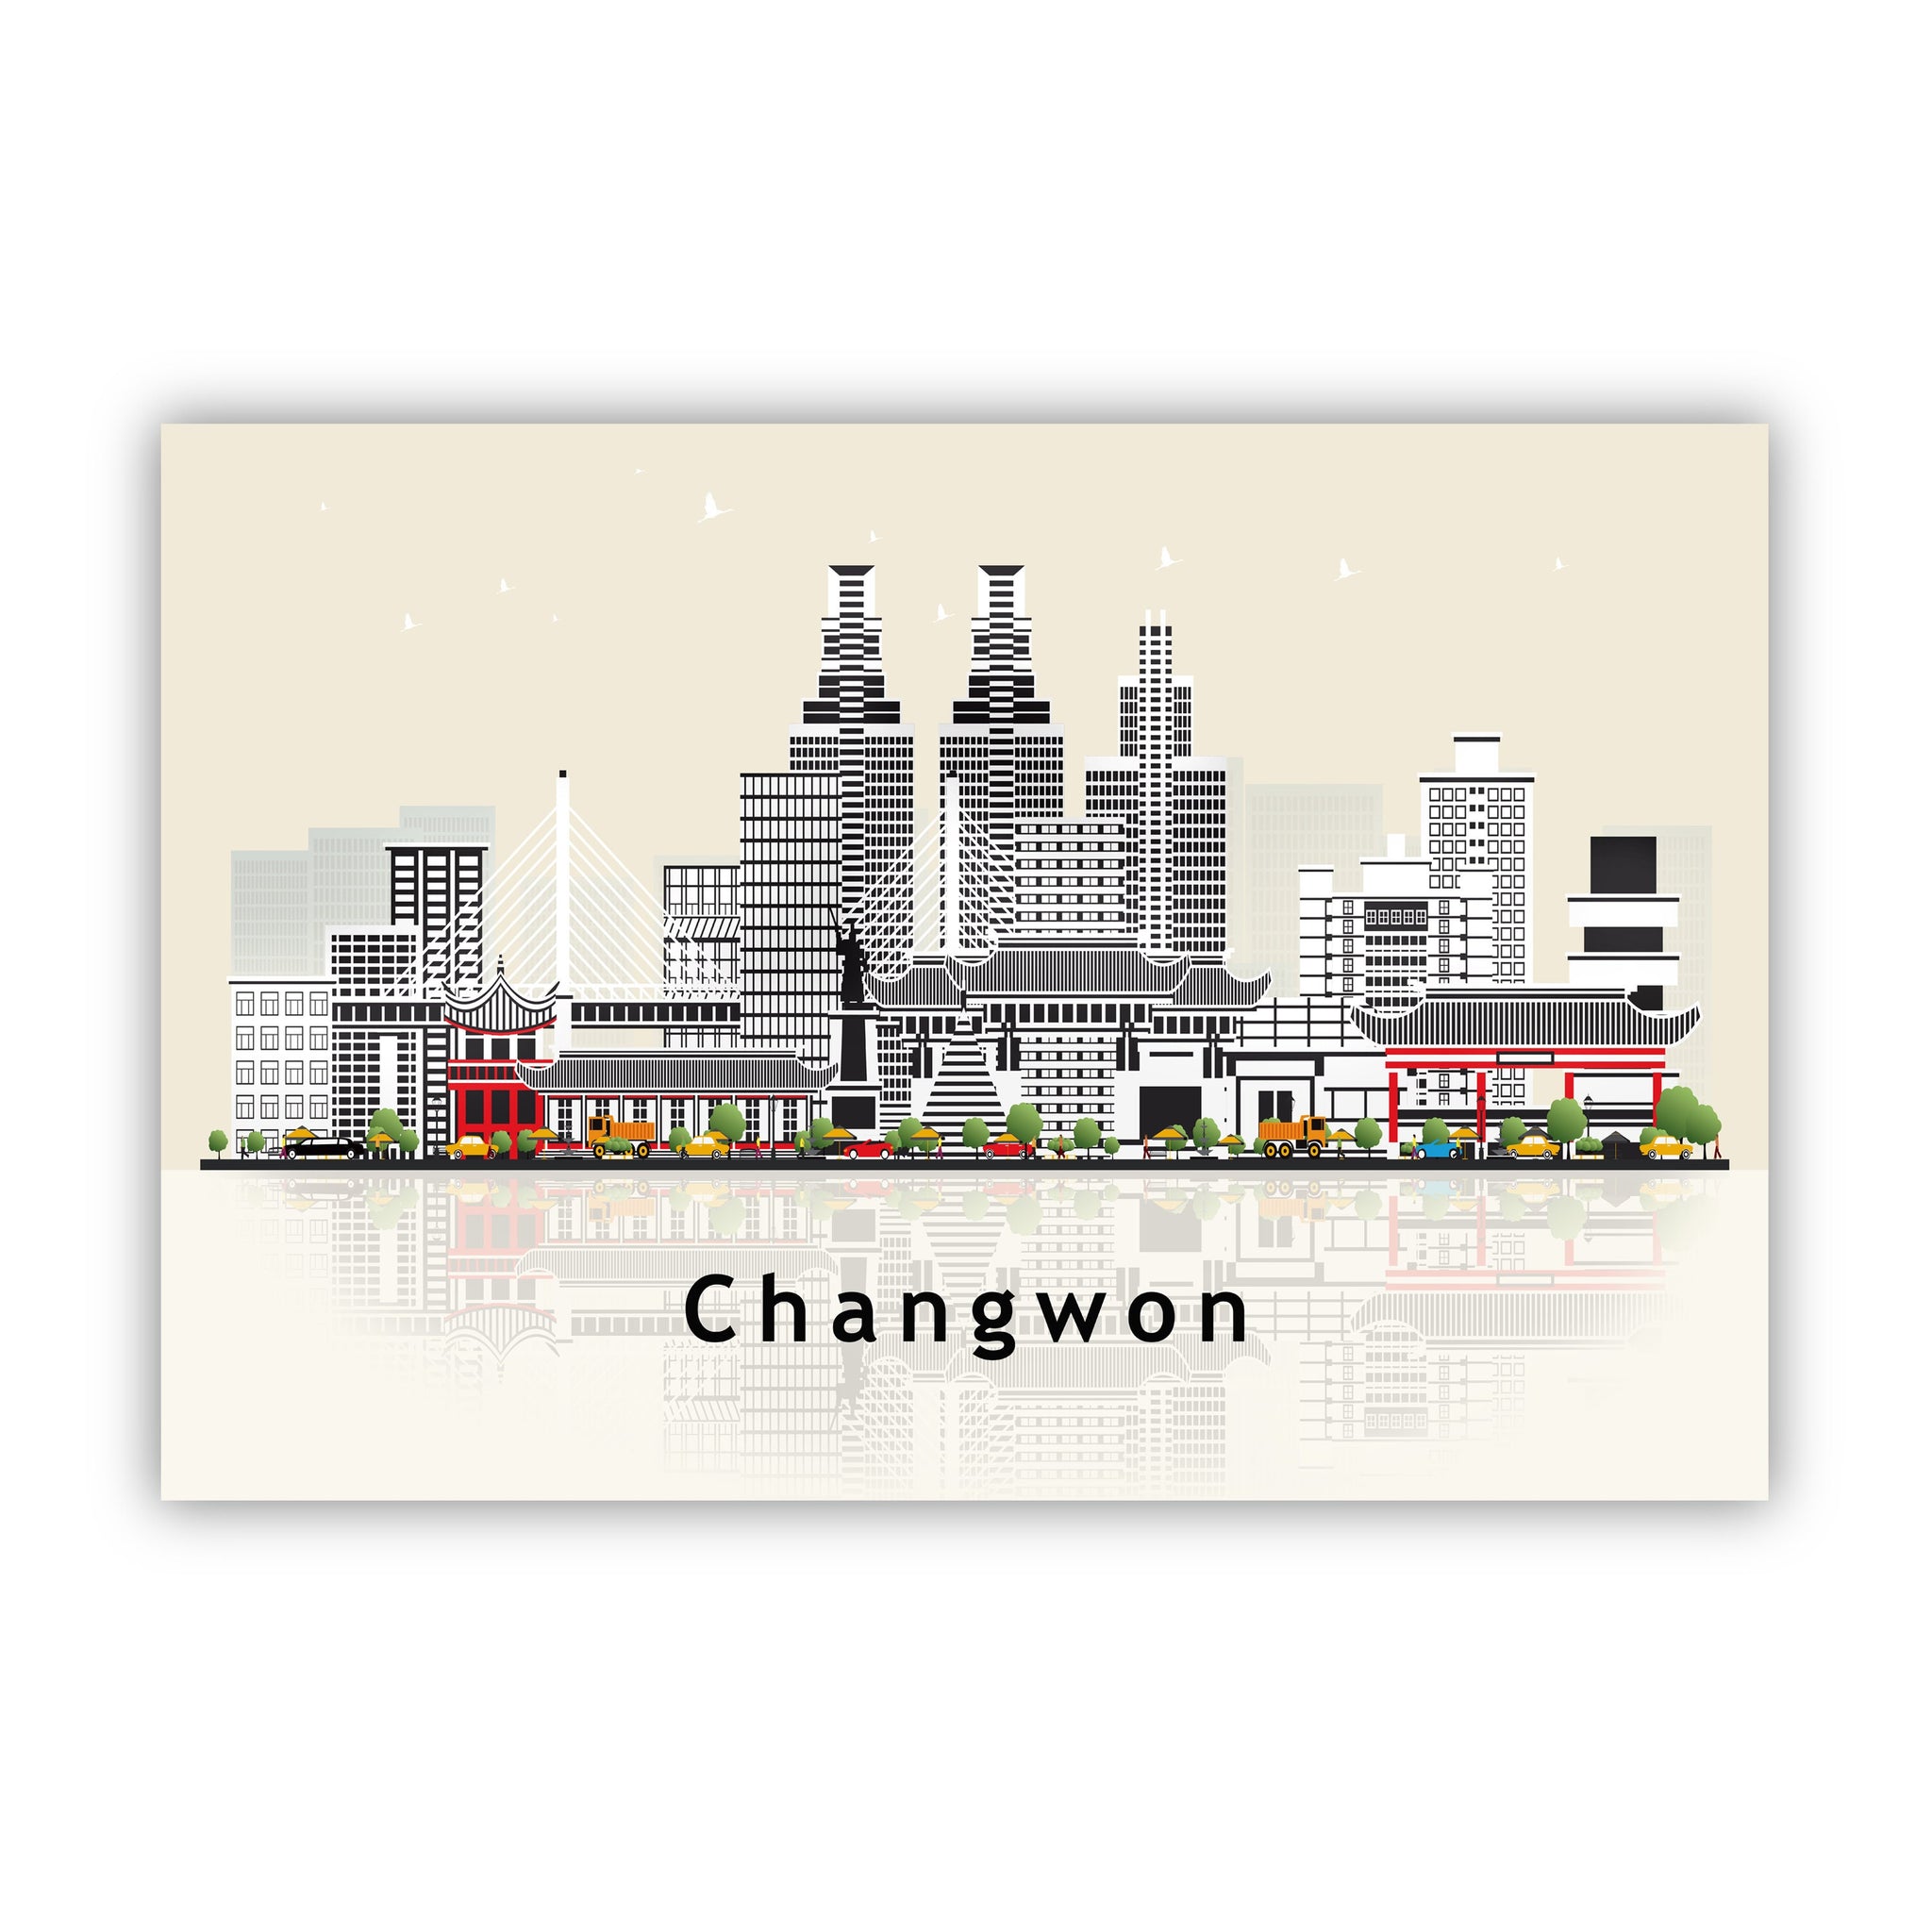 CHANGWON CHINA Illustration skyline poster, Modern skyline cityscape poster, China city skyline landmark map poster, Home wall decoration